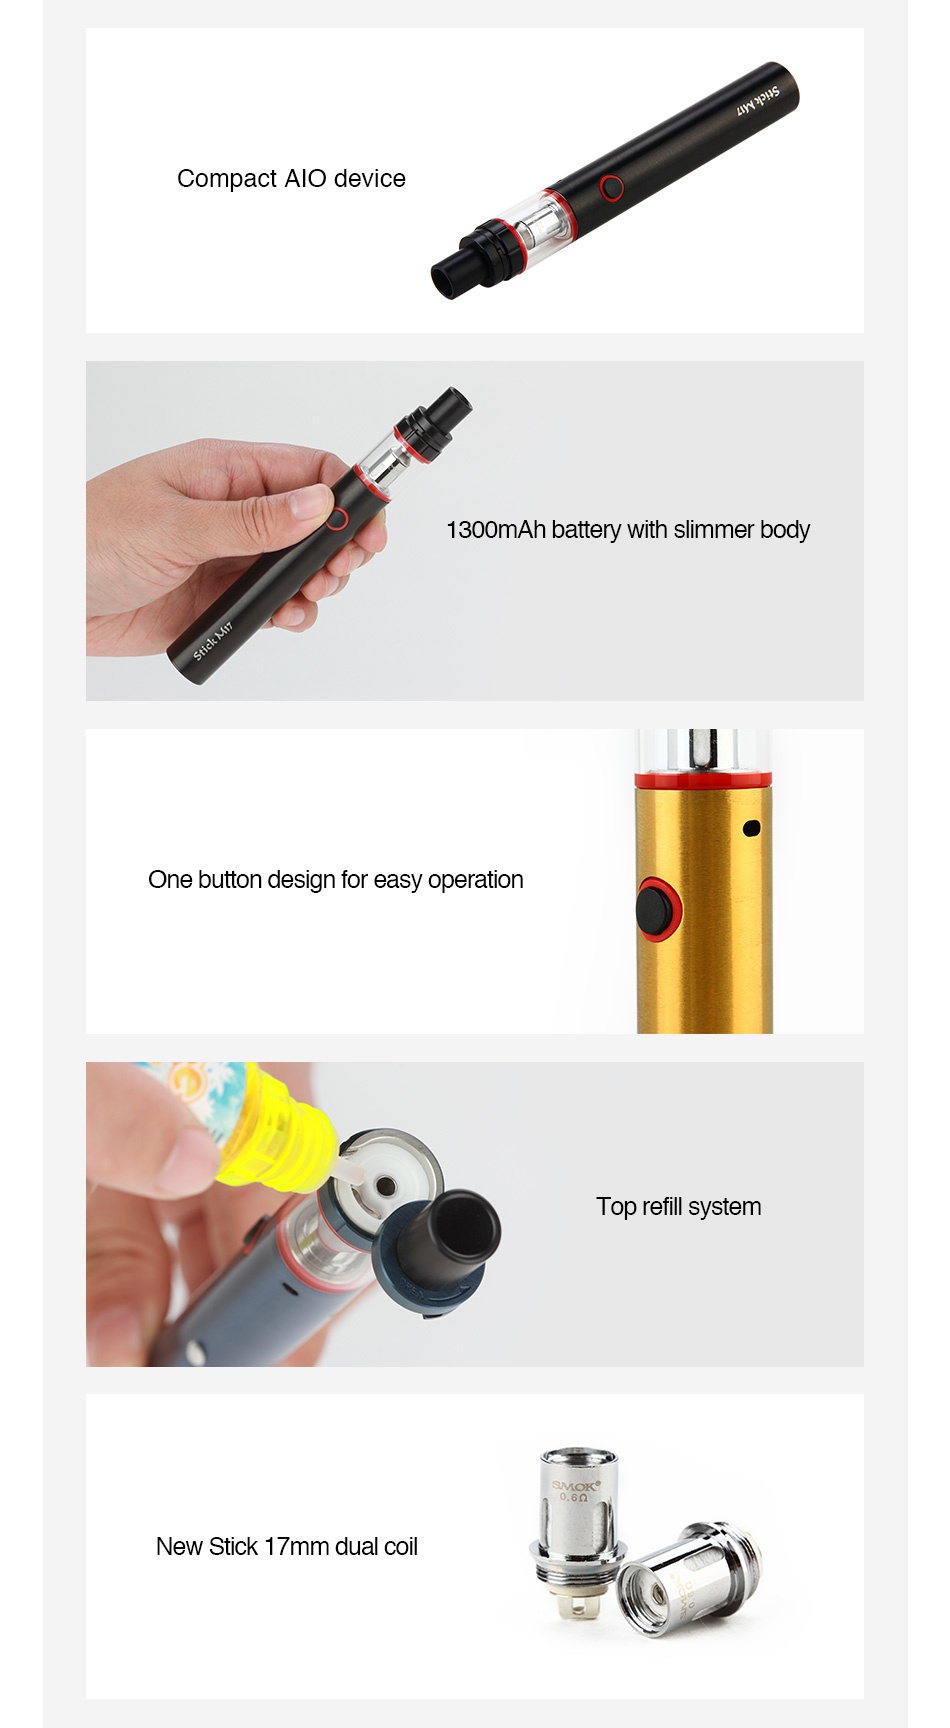 SMOK Stick M17 AIO Kit 1300mAh Compact Alo device 1300mAh battery with slimmer bod One button design for easy operation Top refill system New stick 17mm dual coil